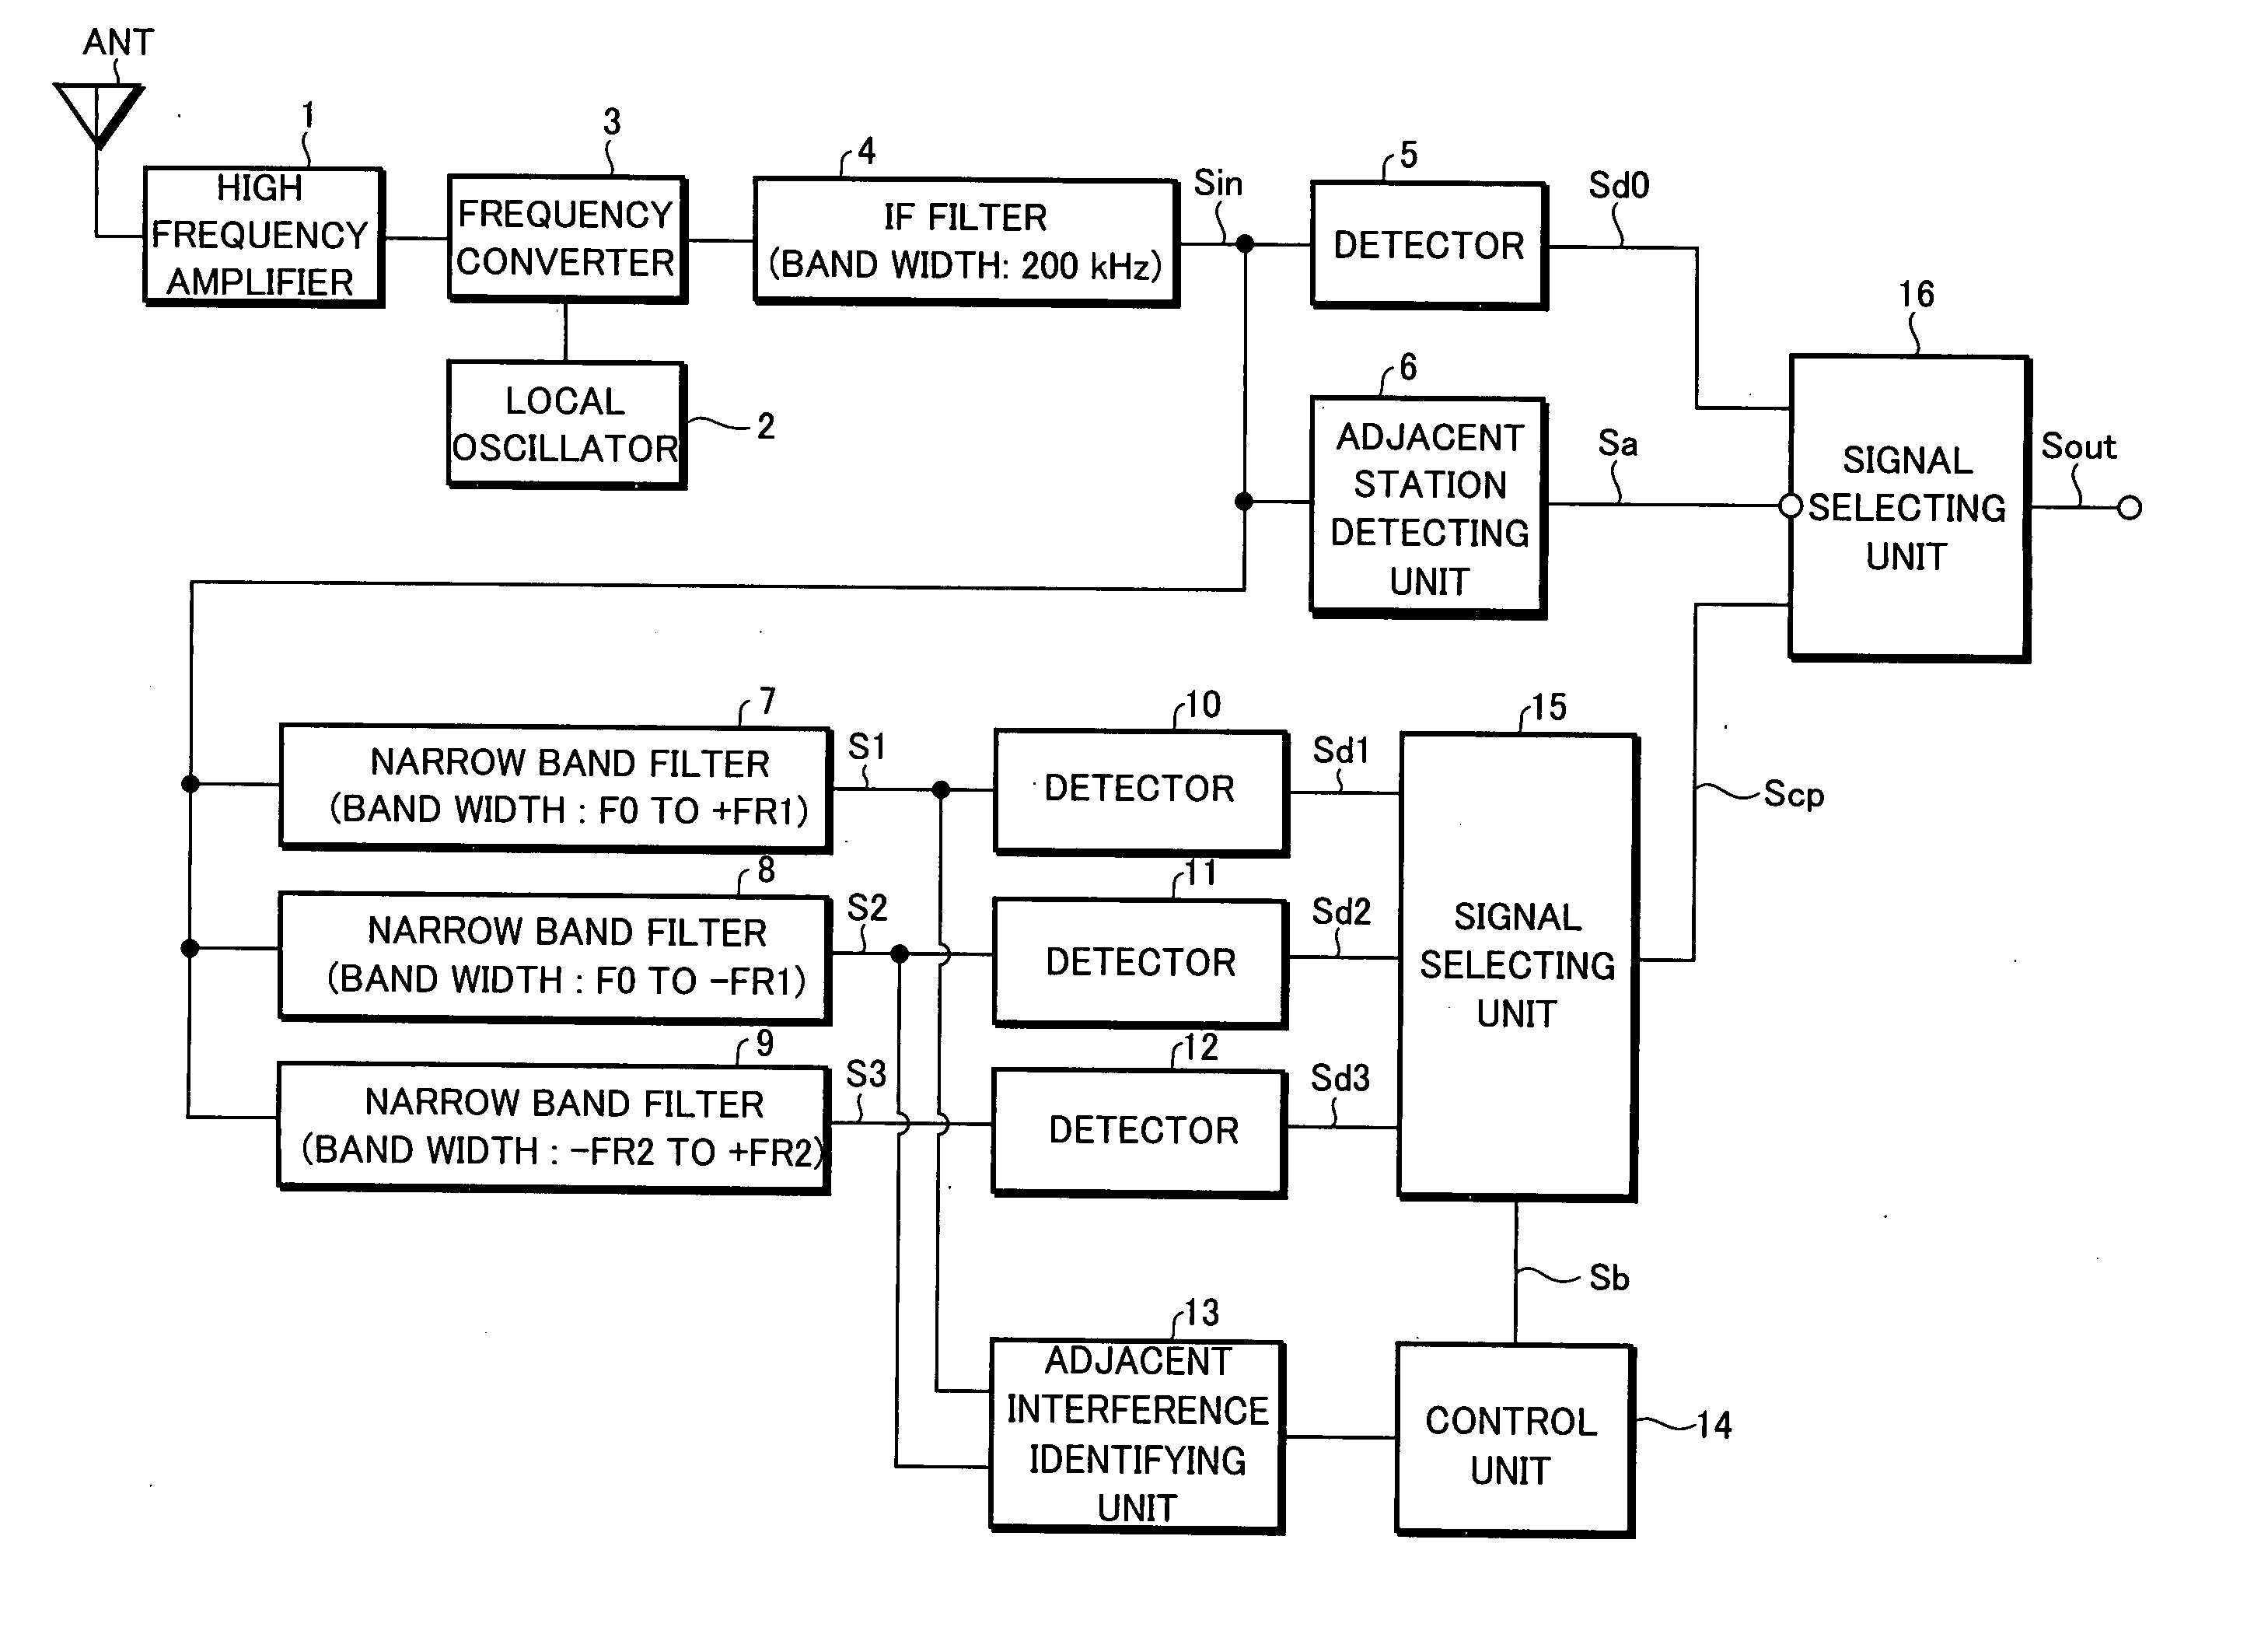 Adjacent interference removal device